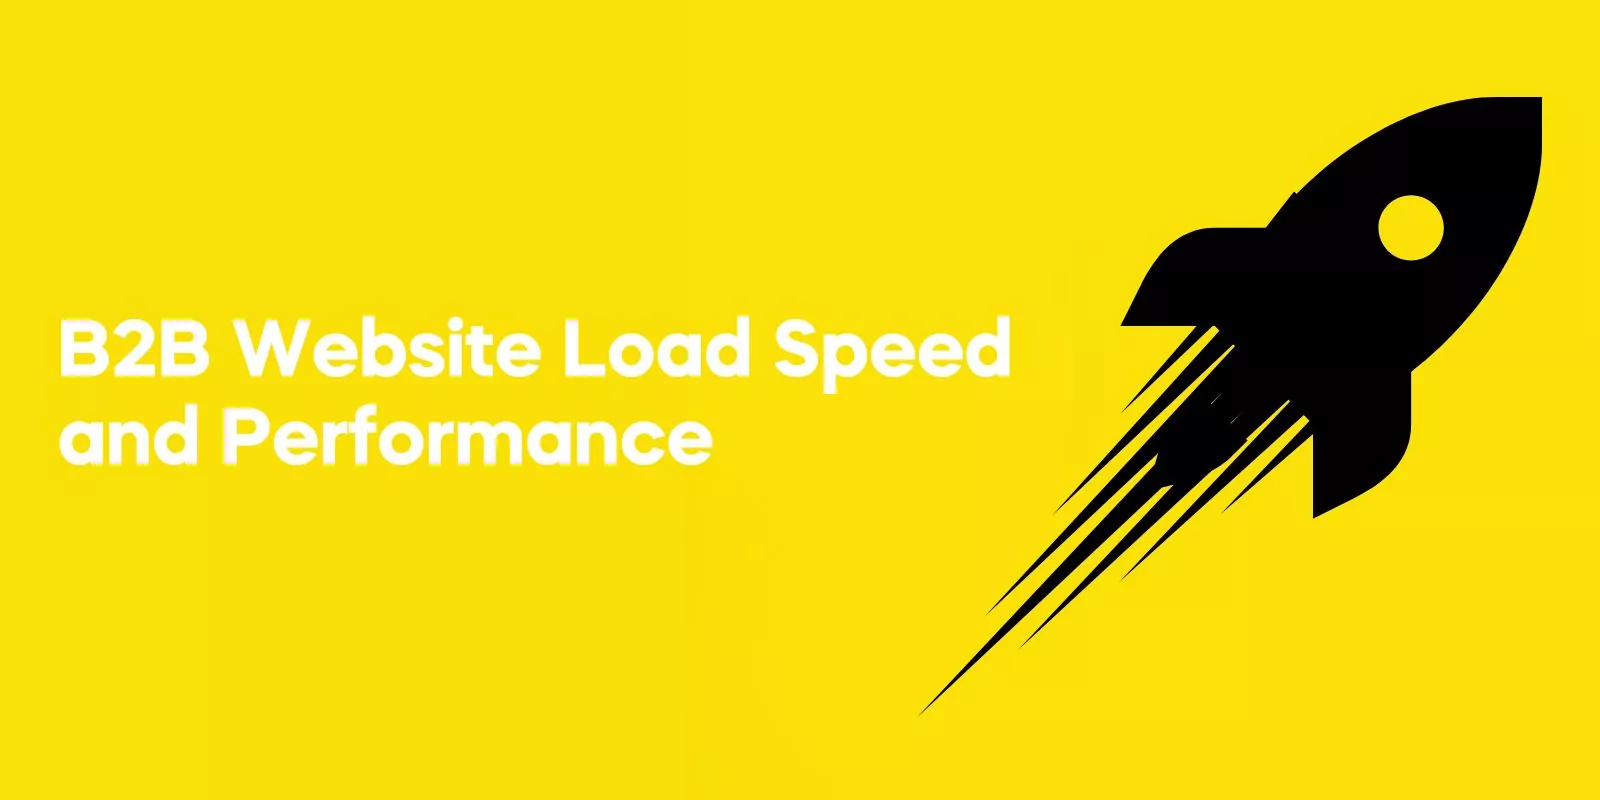 B2B Website Load Speed and Performance